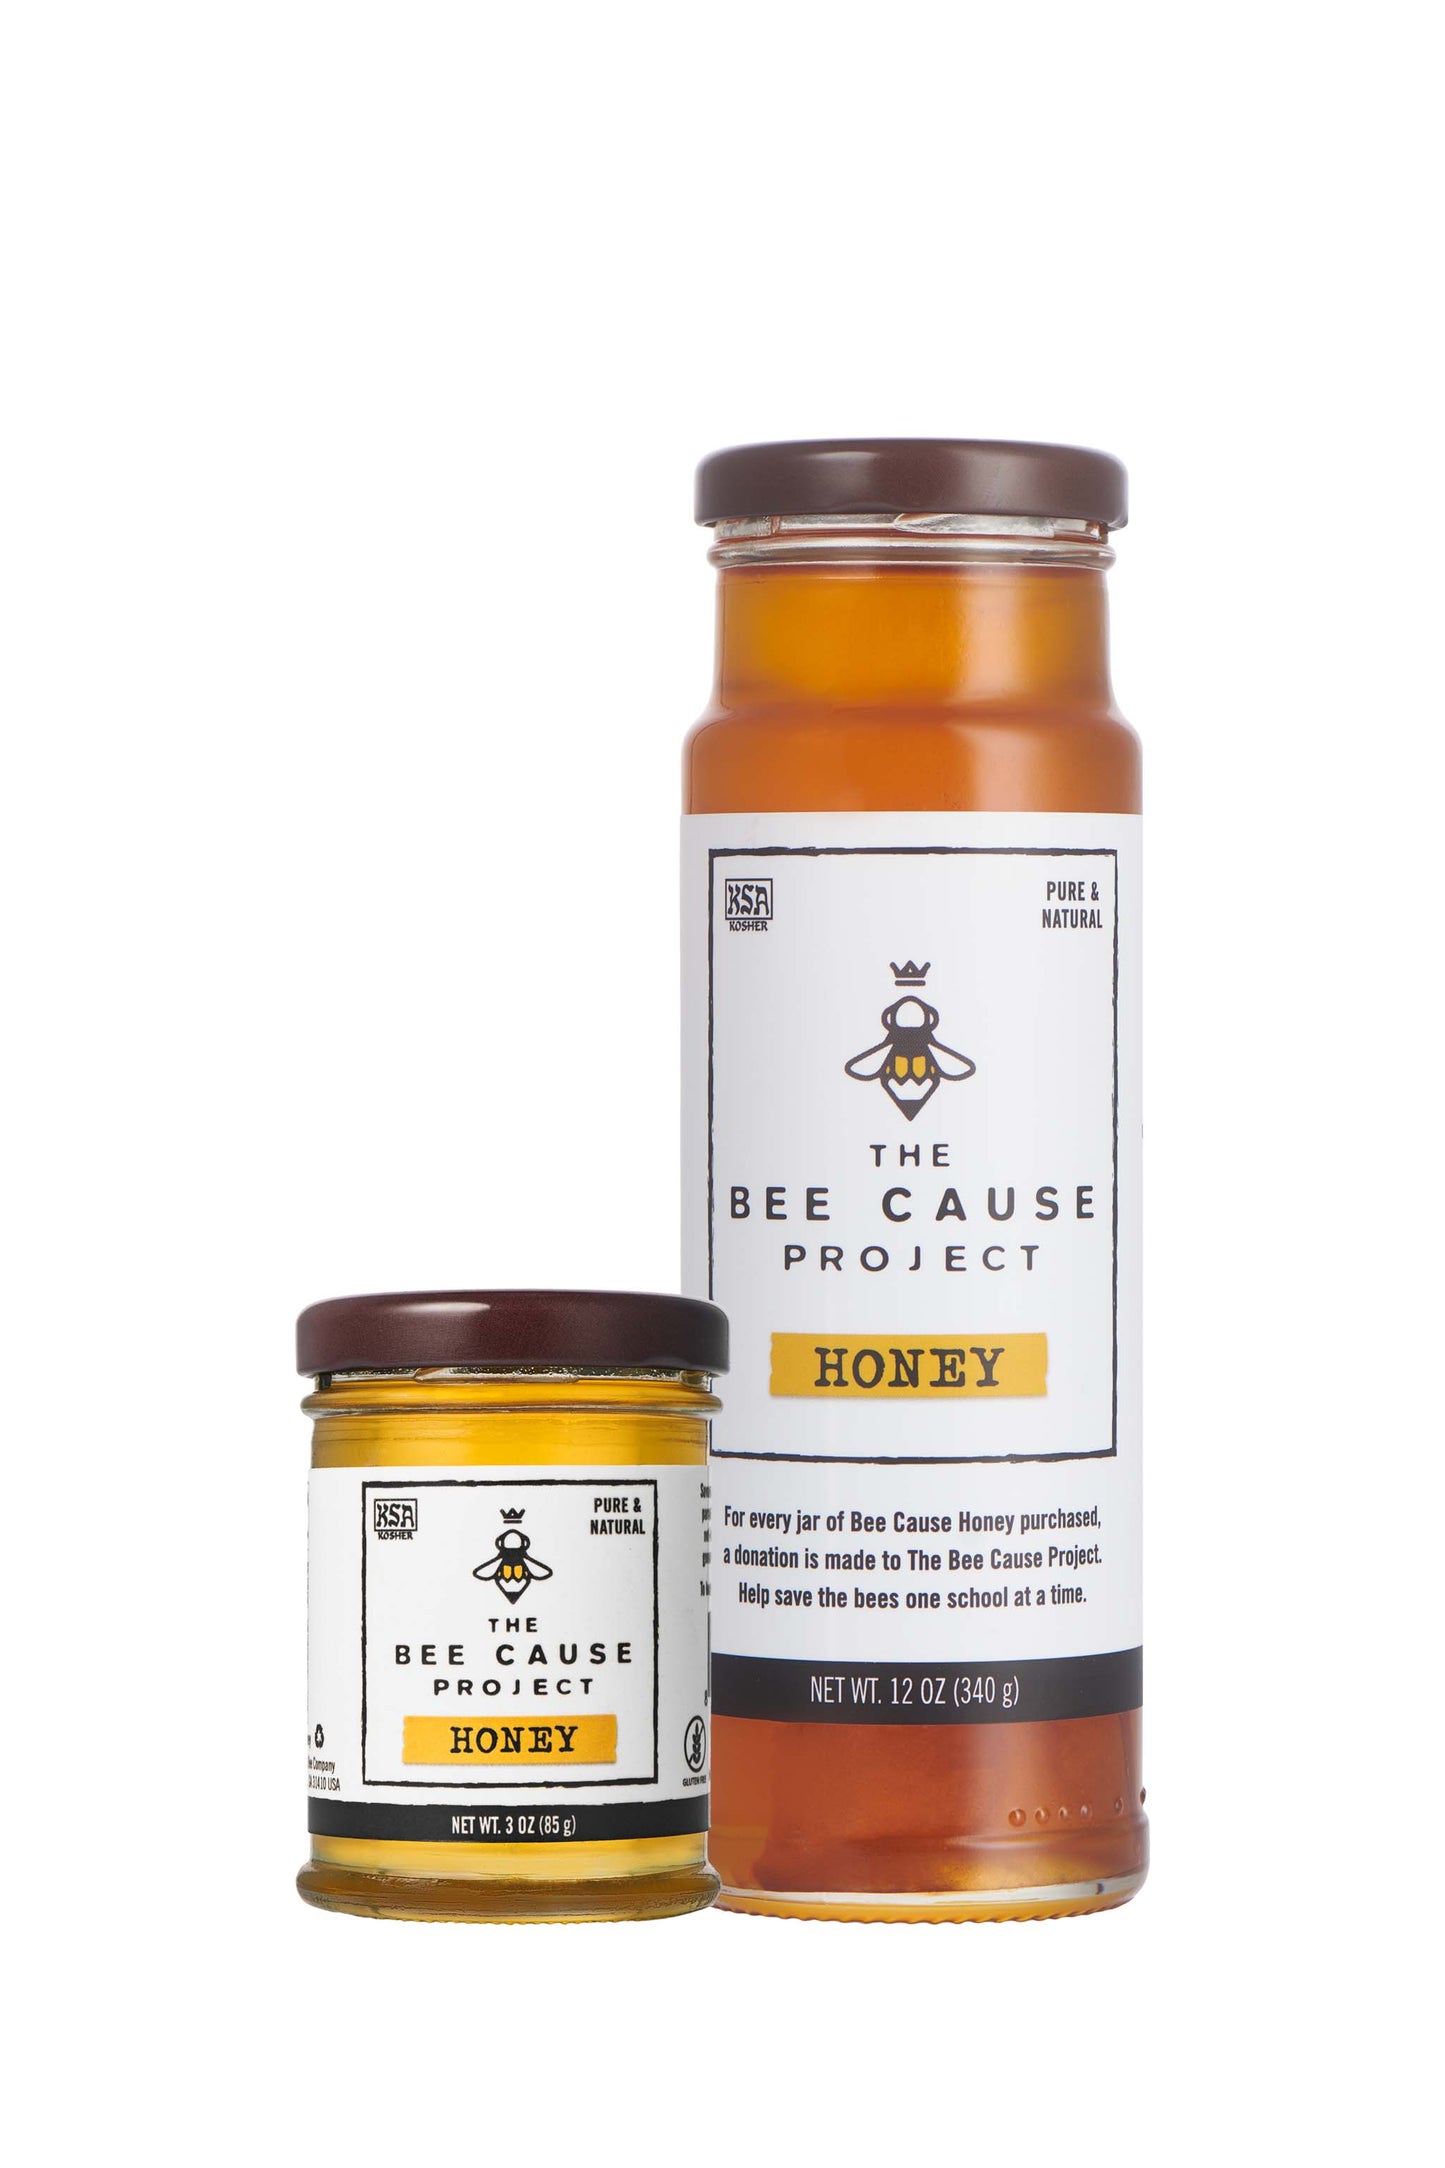 The Bee Cause Project Honey comes in a 3 oz mini, 12 oz. tower . This honey goes to support The Bee Cause Project. Helping save the bees one school at a time.